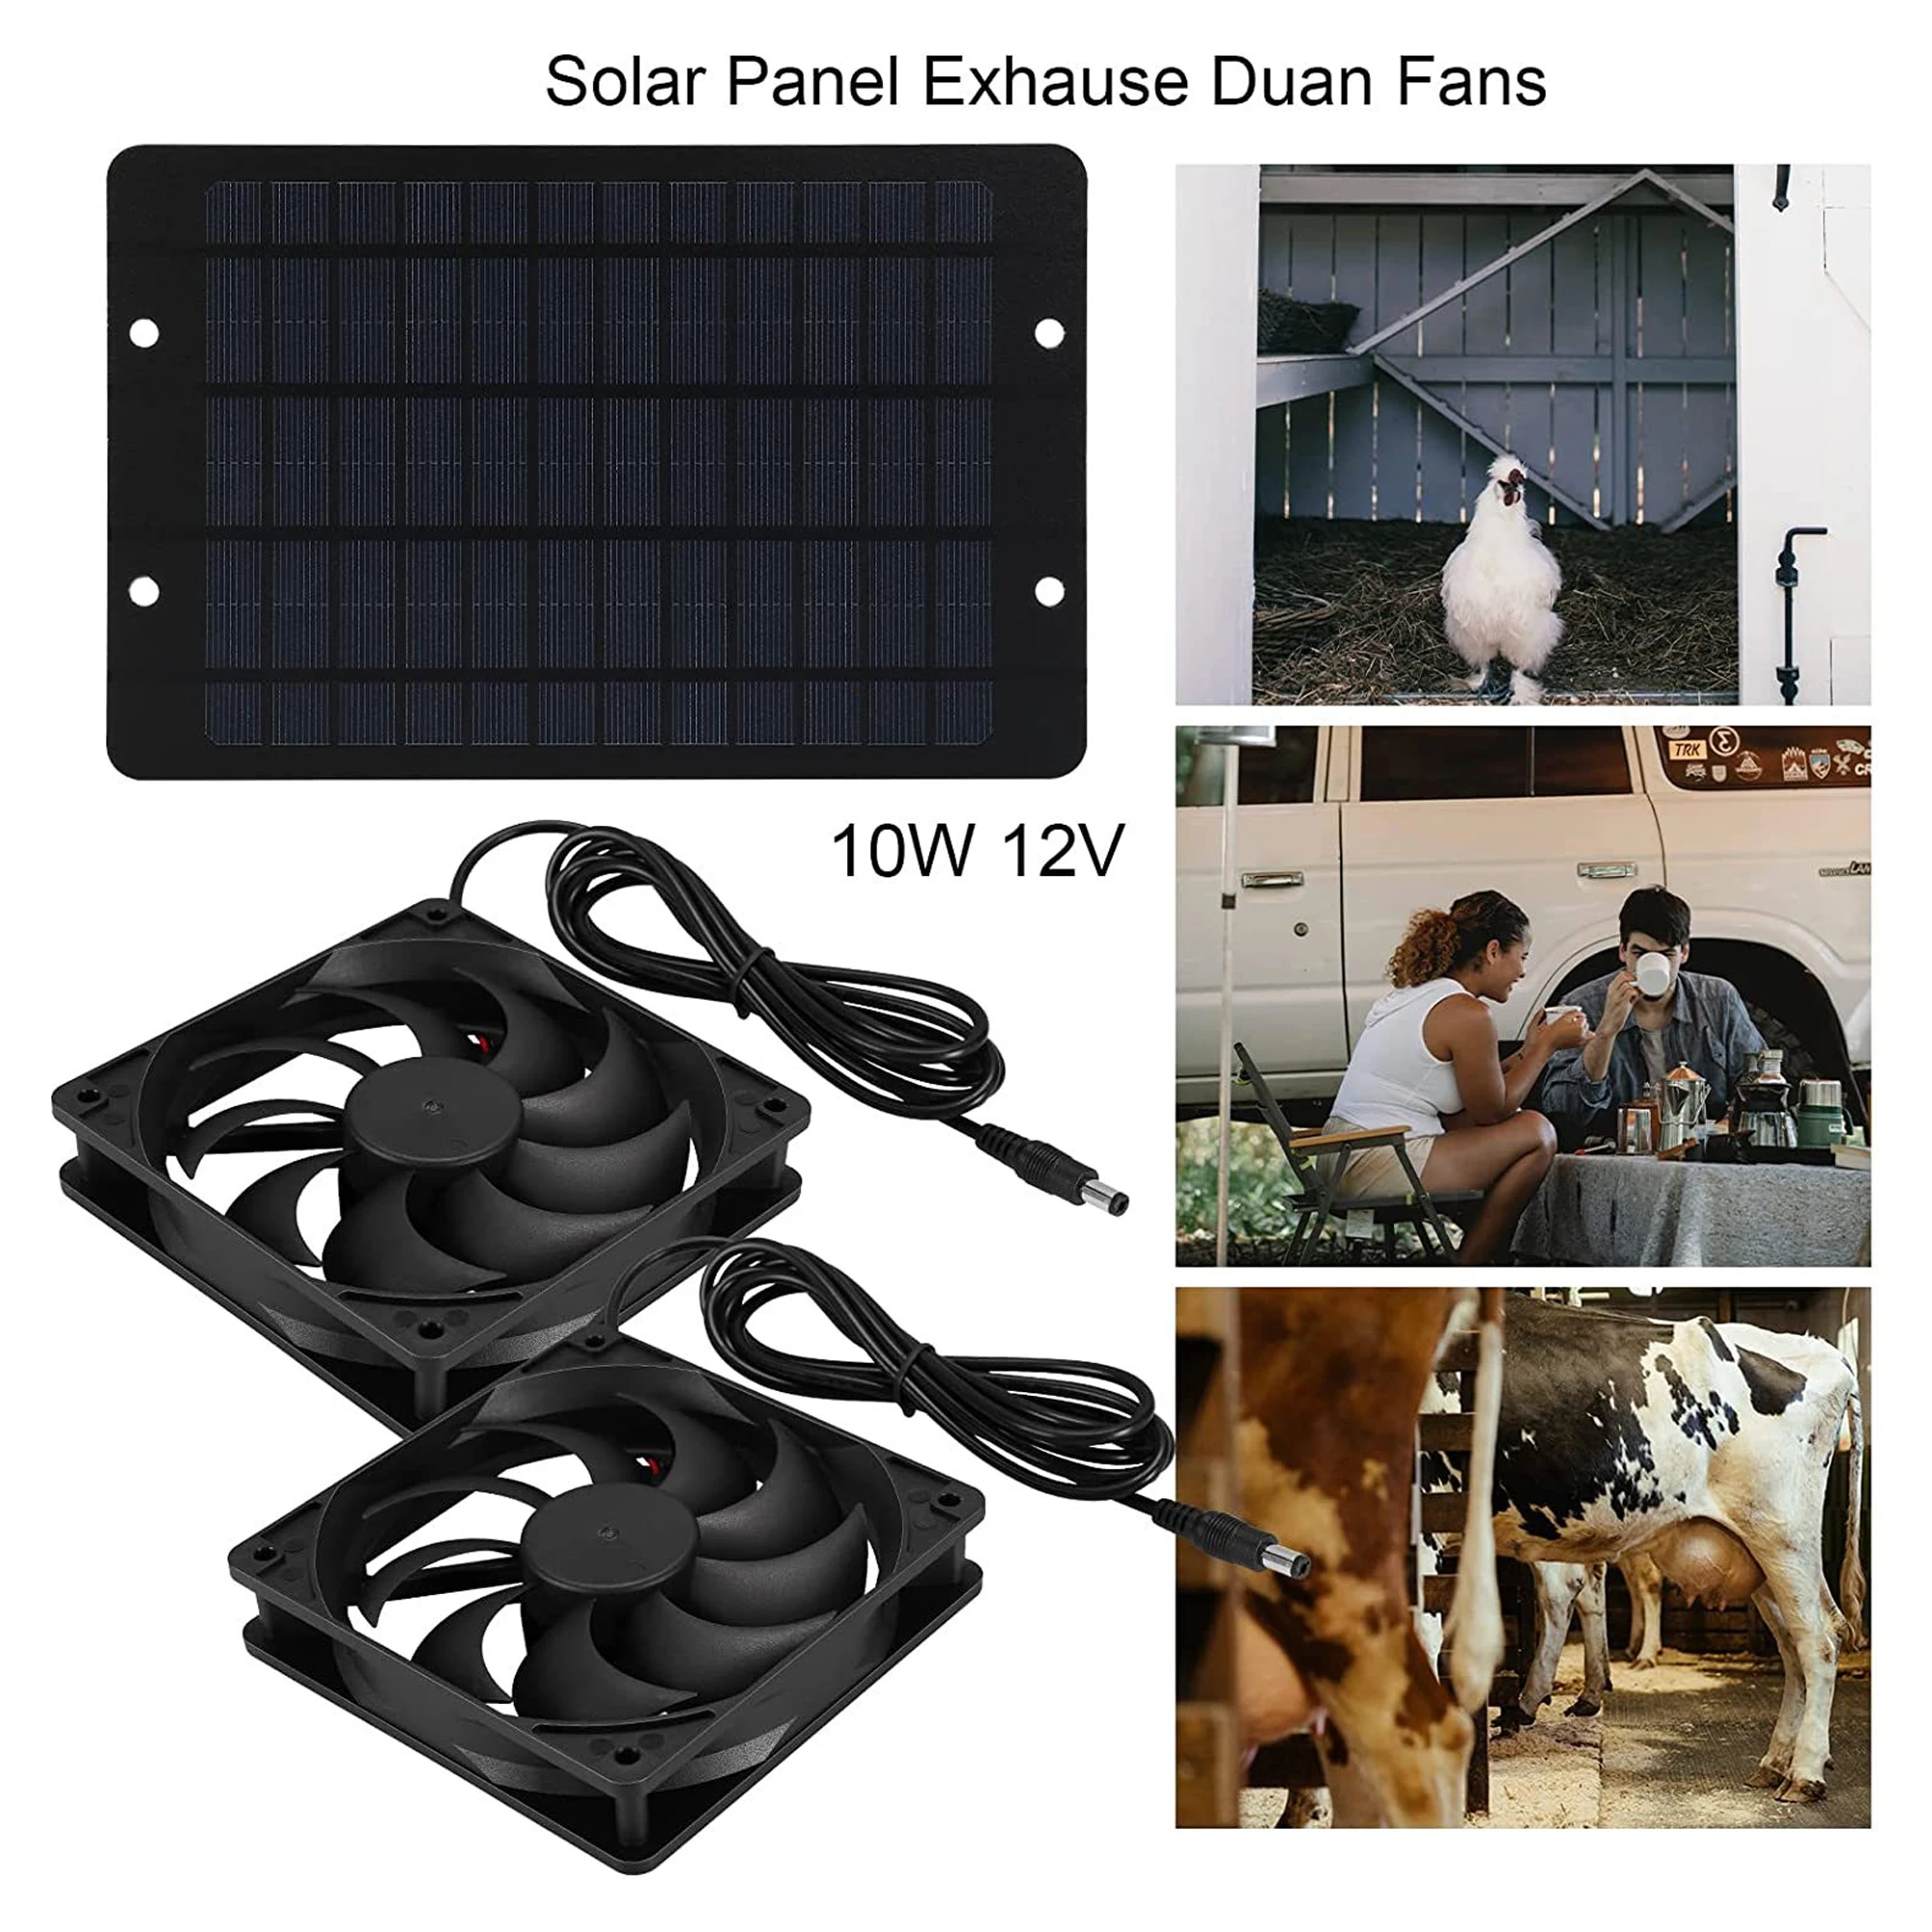 

10W Duck Cage Chicken House Solar Powered Exhaust Vent Fan Home Ventilator Ventilating Dual Fans Livestock Poultry